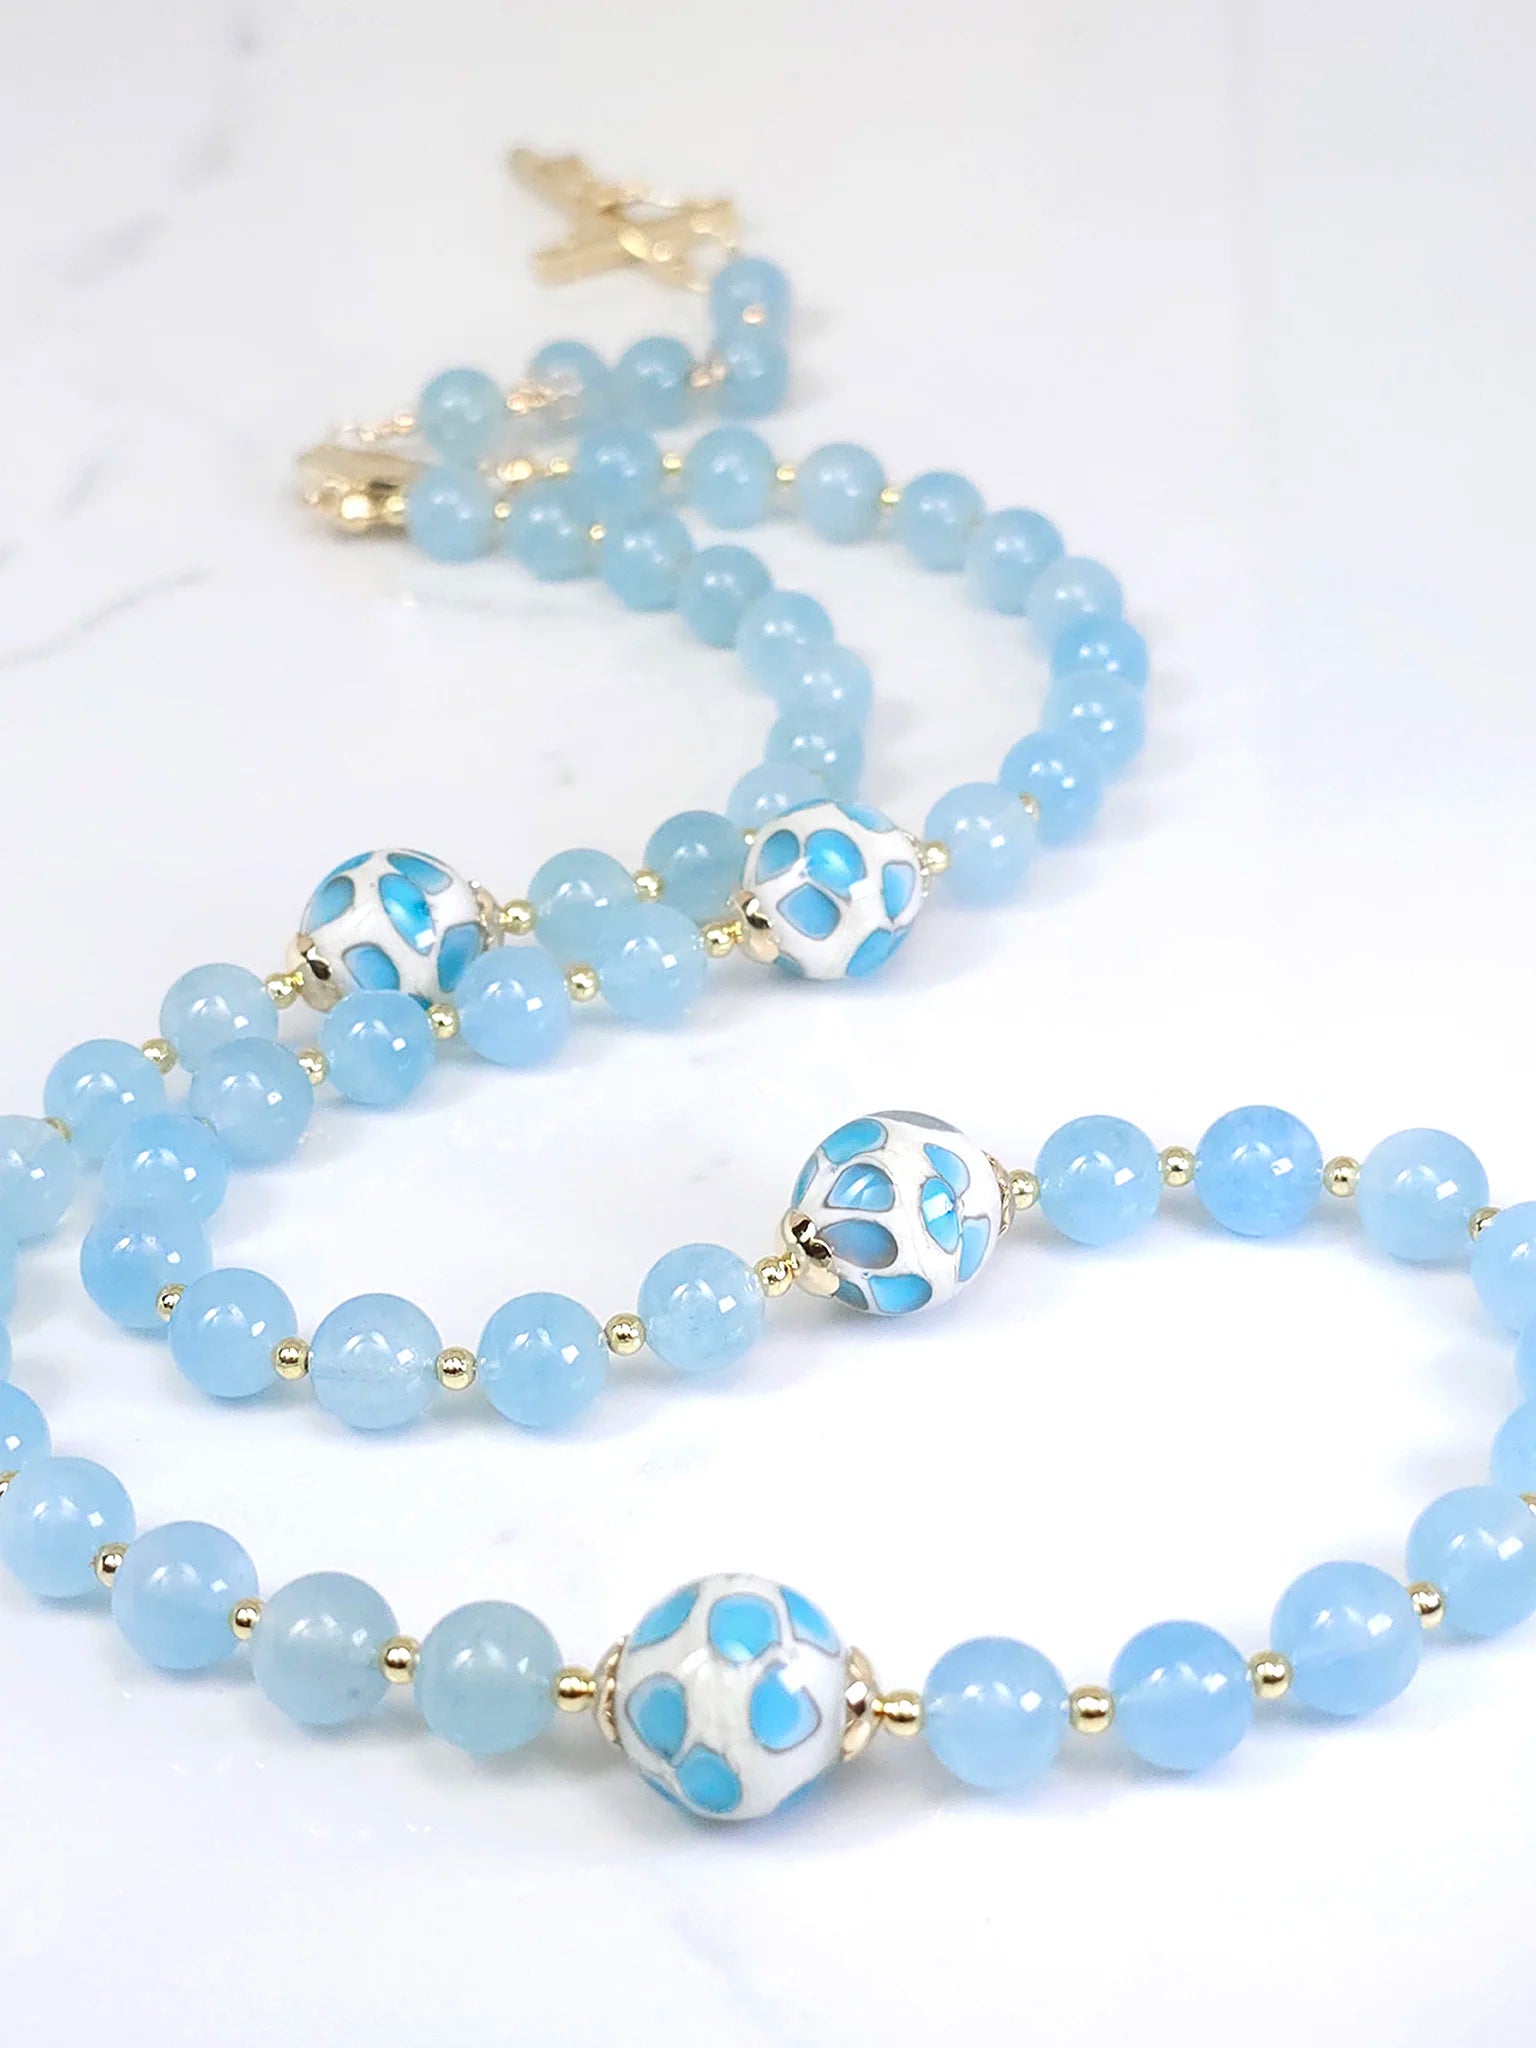 Rosary necklace adorned with intricate beads and blue little flower glass bead accents, laid out on a white table backdrop.